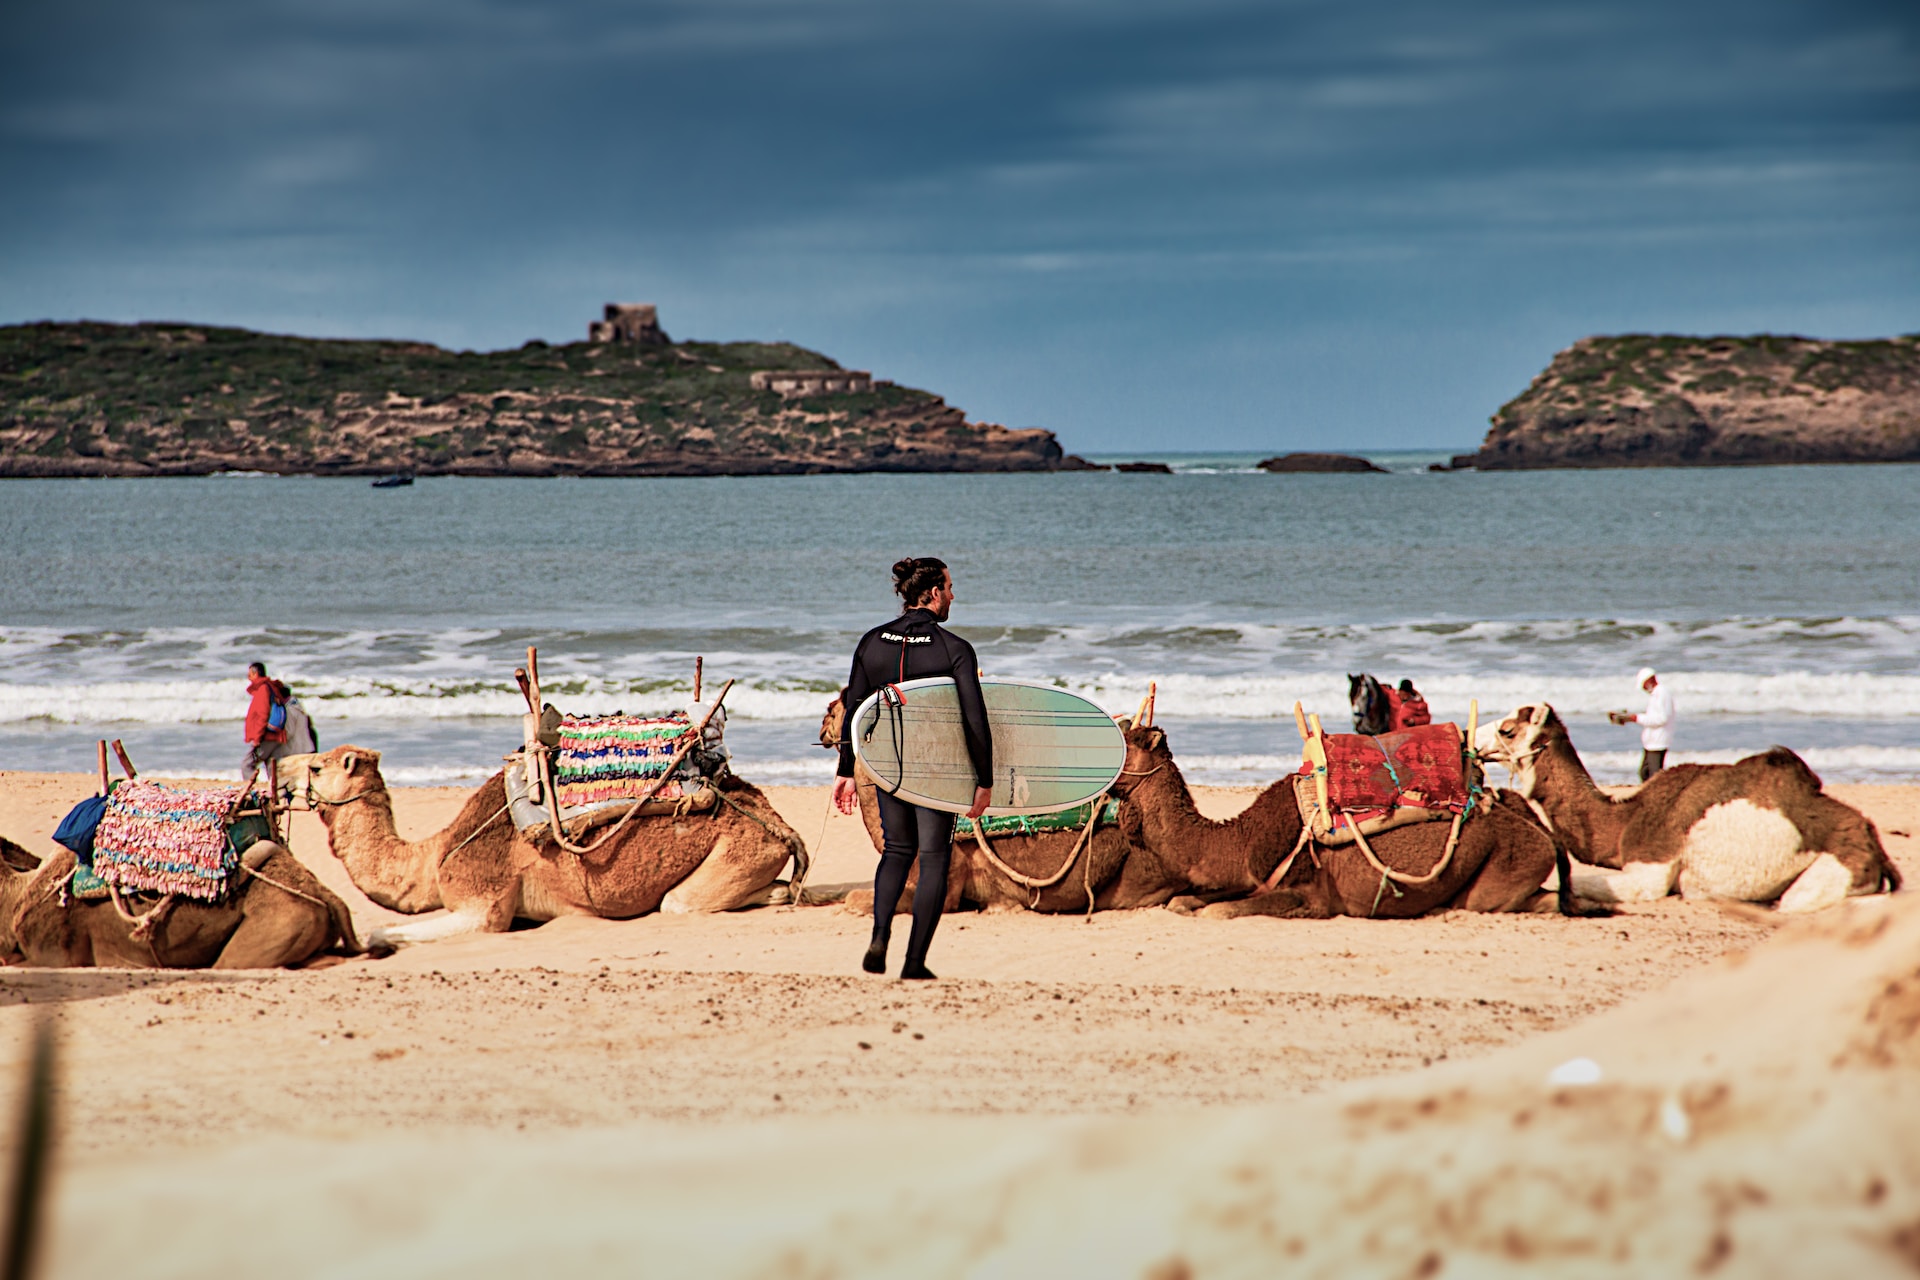 How to get from Marrakech to Essaouira